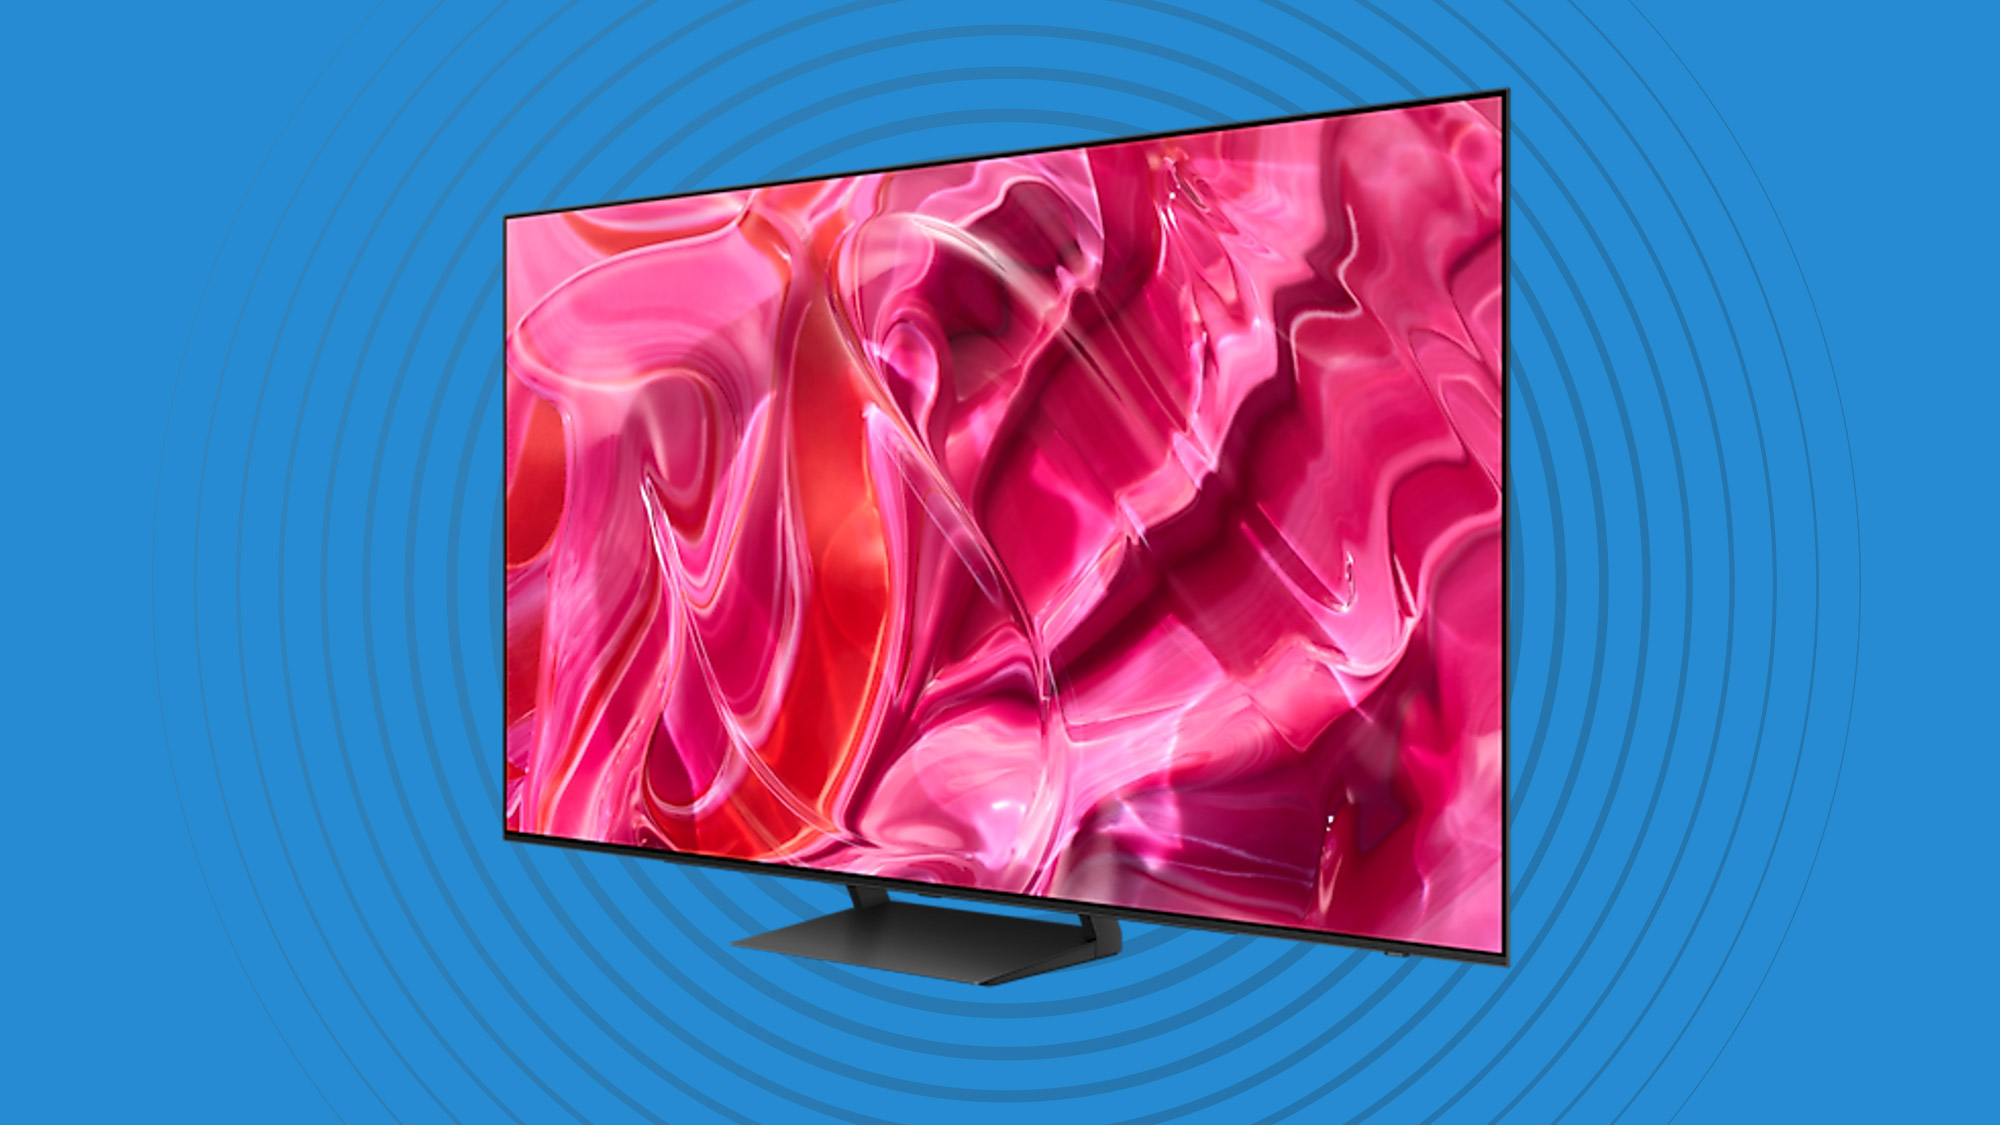 LG C3 OLED TVs drop to £1,299 - the lowest price ever